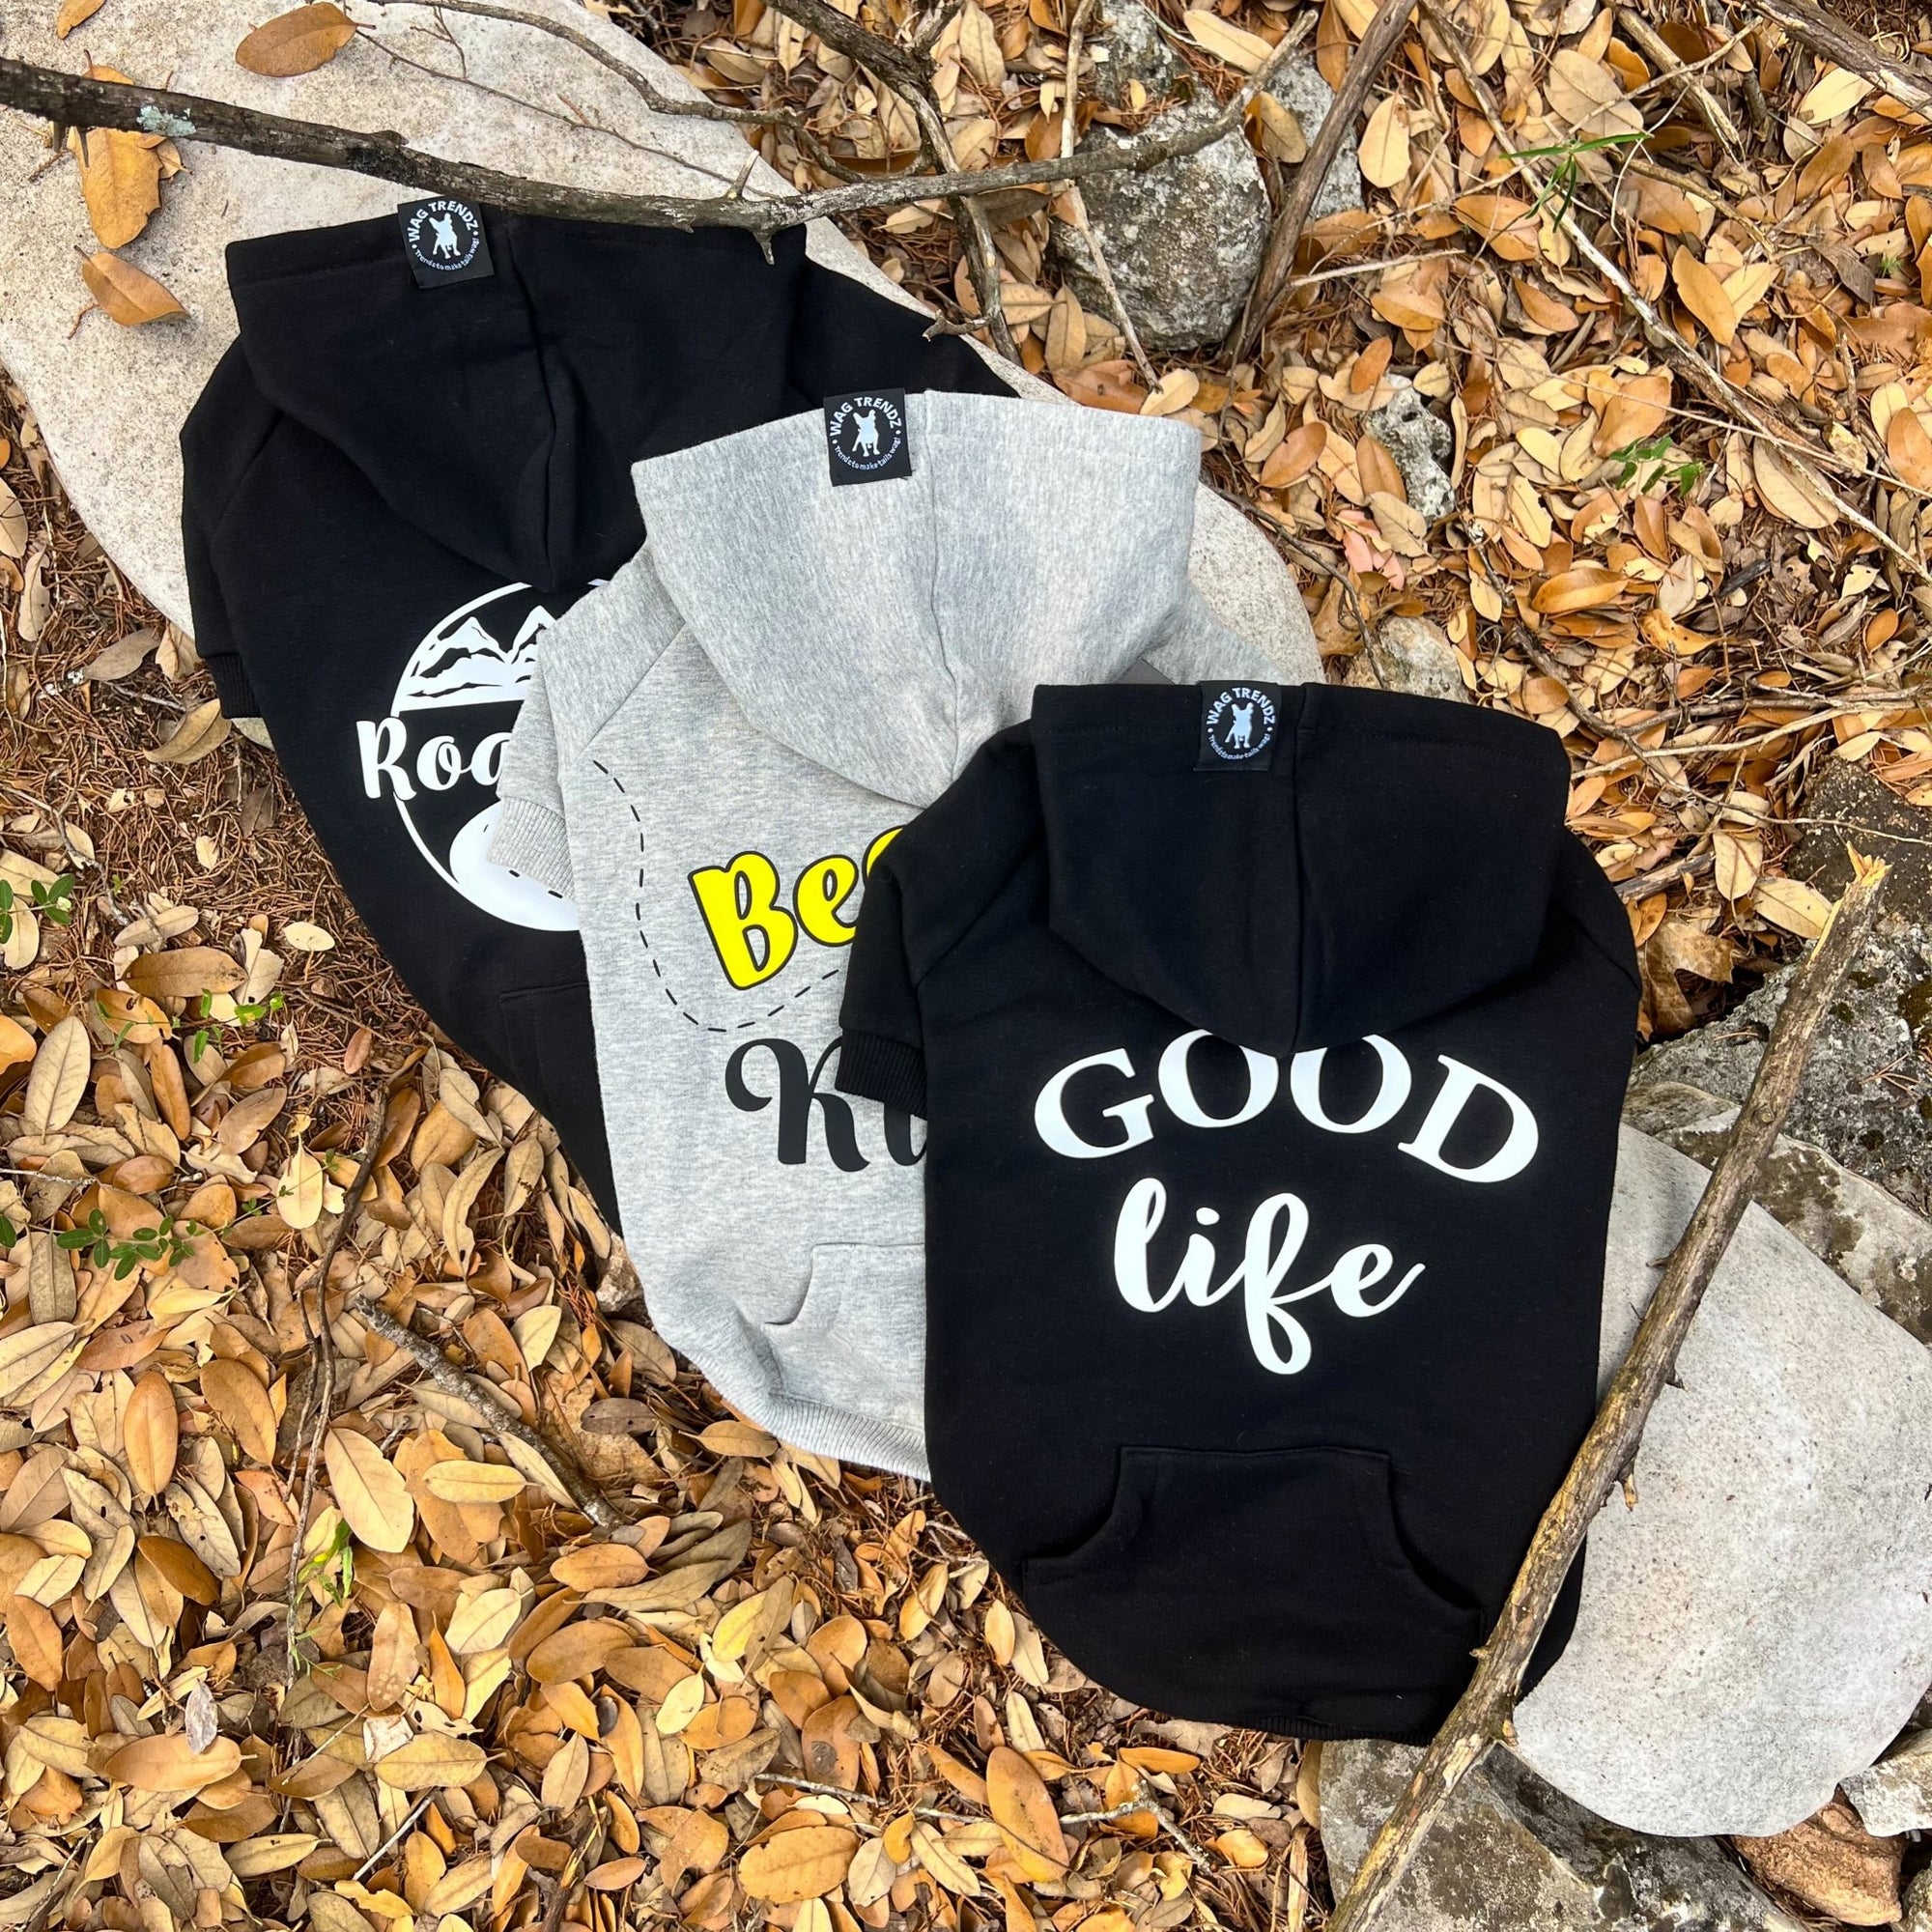 Dog Hoodie - Hoodies For Dogs - &quot;Good Life&quot;, &quot;Bee Kind&quot;, and &quot;Road Trip&quot; dog hoodie in black and gray - back view - outdoors laying on a log in a scenic fall background with brown leaves - Wag Trendz